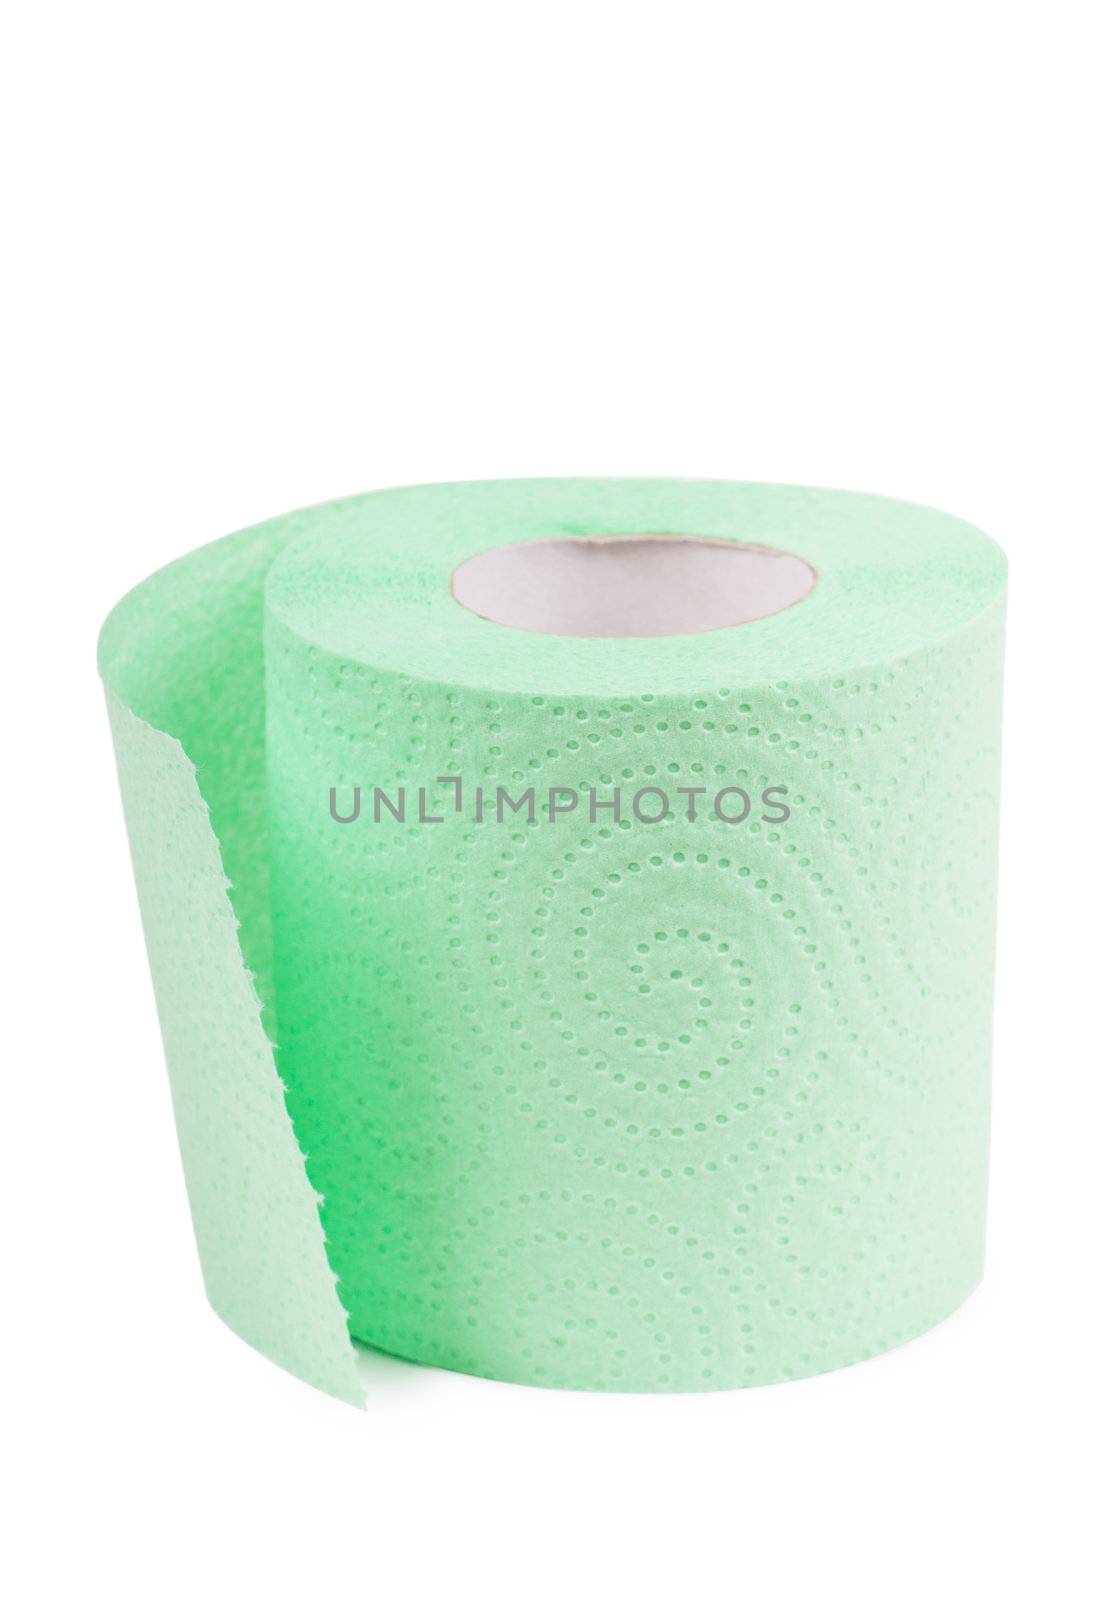 Single green toilet paper isolated over white